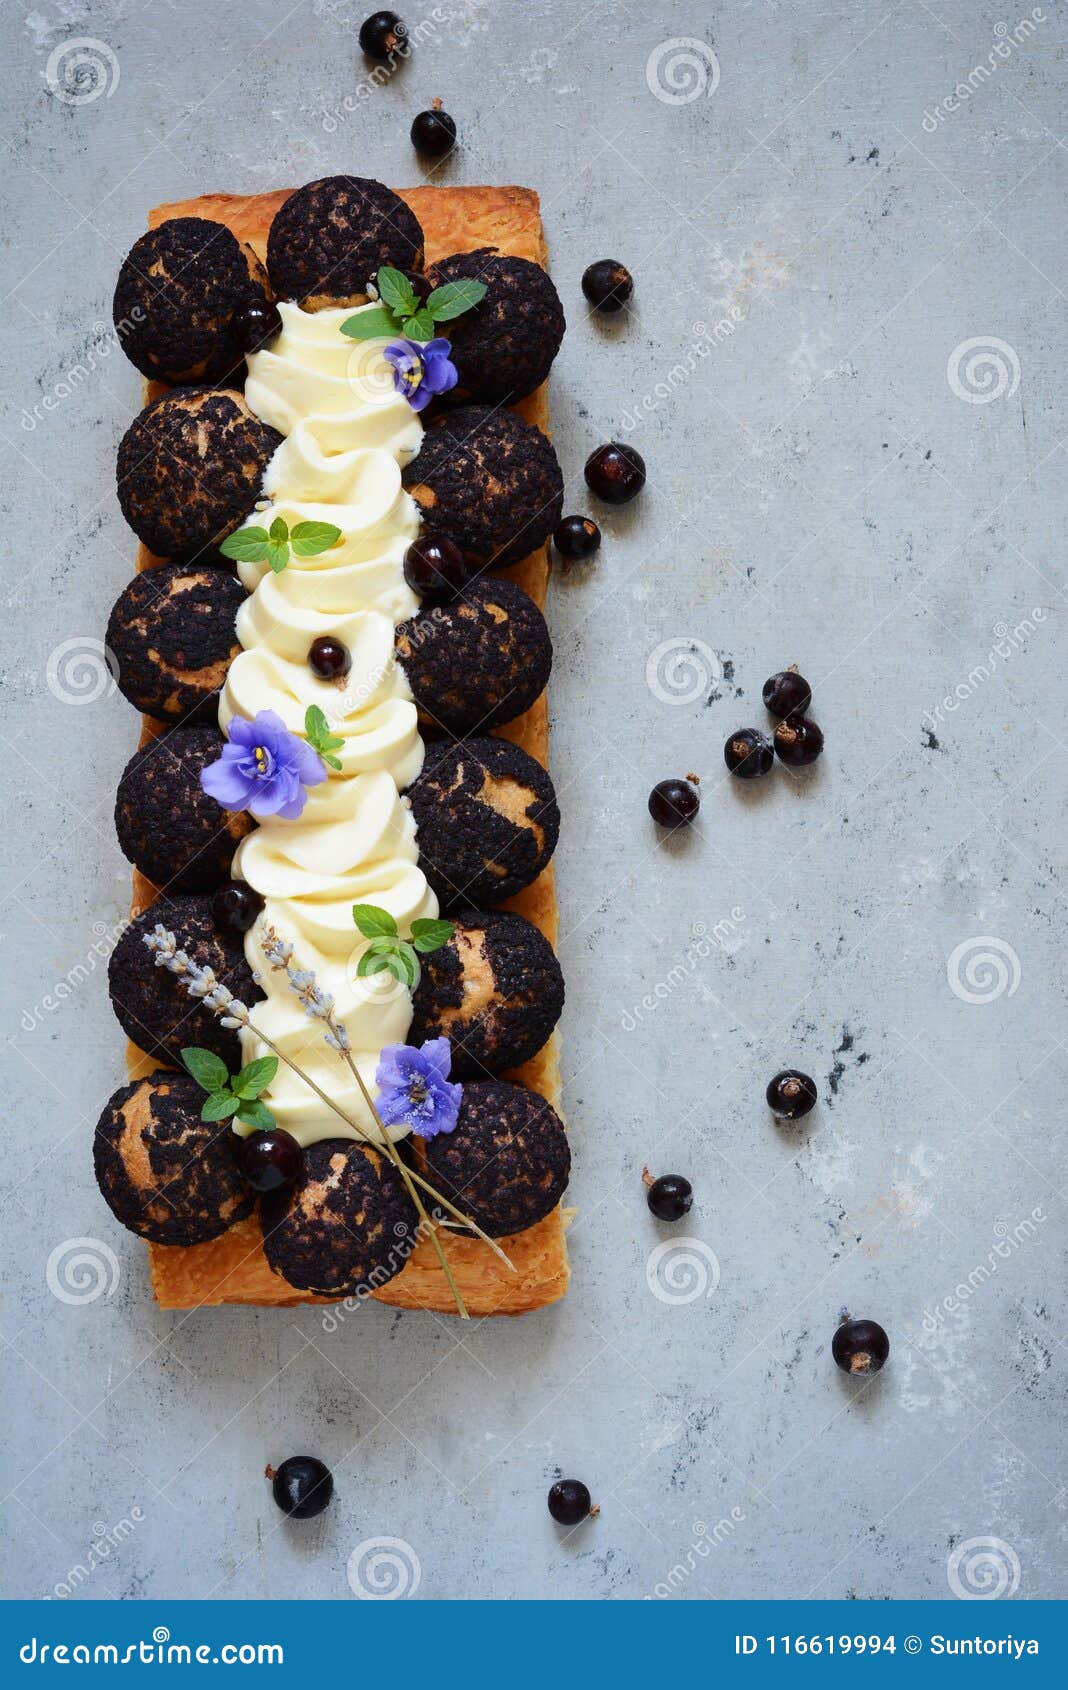 cake of saint-onore from puff pastry, profiteroles, currant cream and whipped cream. classic french dessert. an exquisite confecti